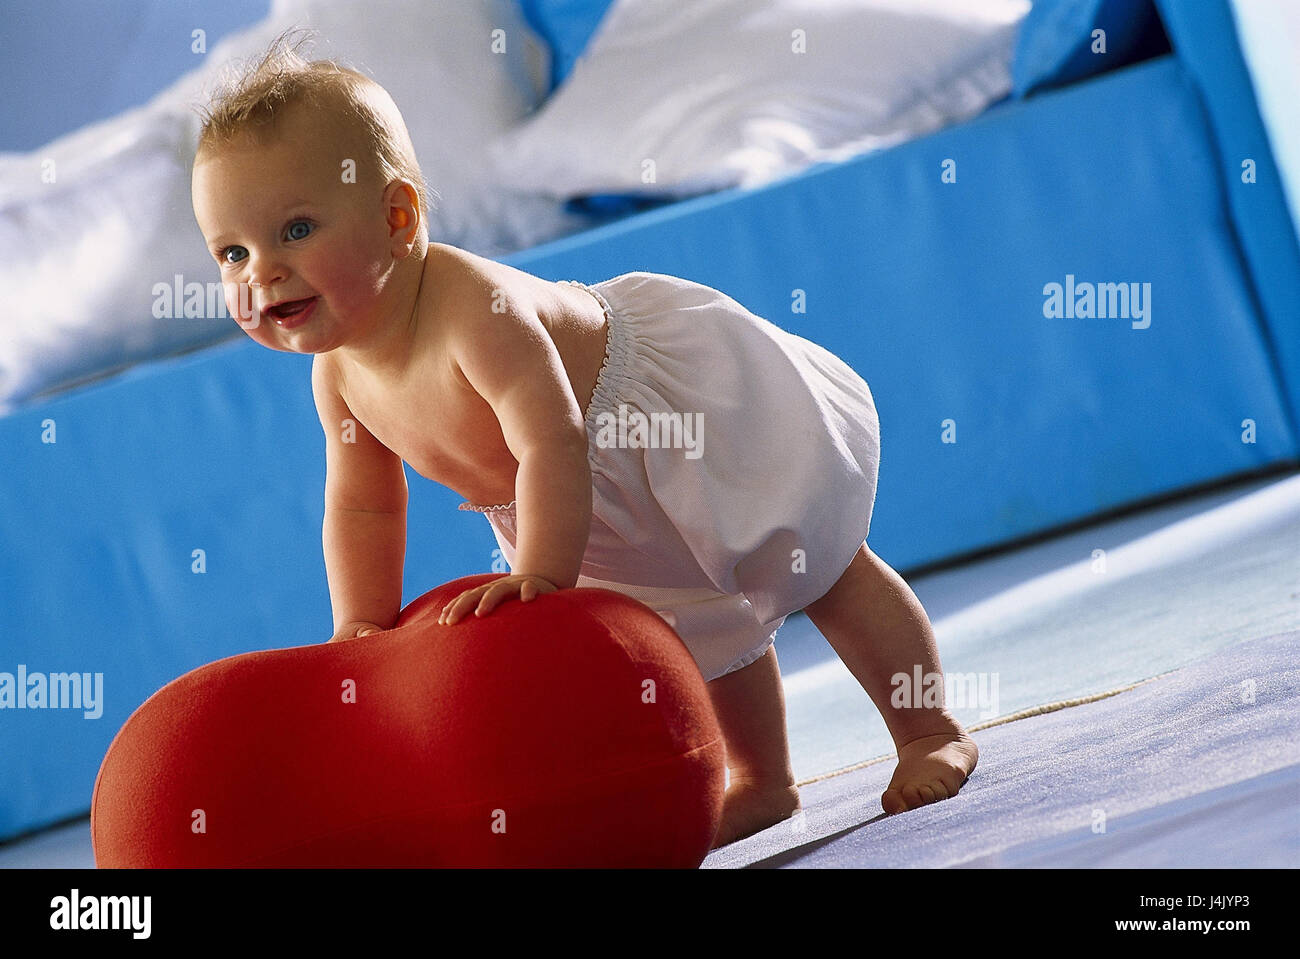 Baby, happily, nappy trousers, standing attempt, hassock, add support inside, at home, child, infant, cheerfully, brightly, learn stand, to go, try, try, pride, upper parts of the body freely Stock Photo